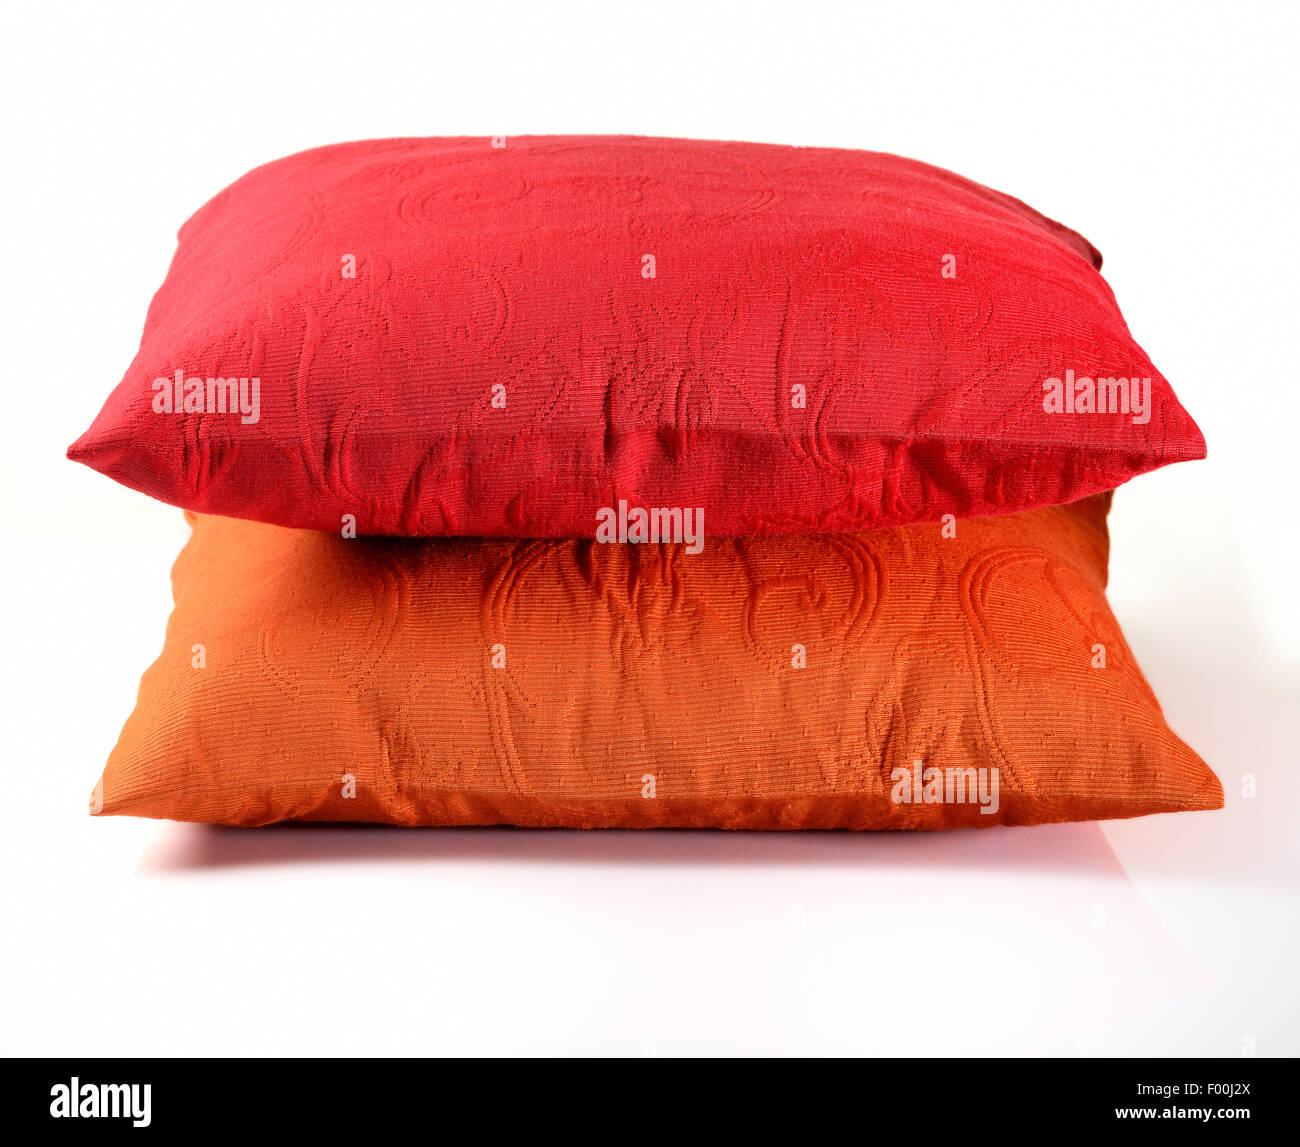 Red and Orange Pillow on white background Stock Photo